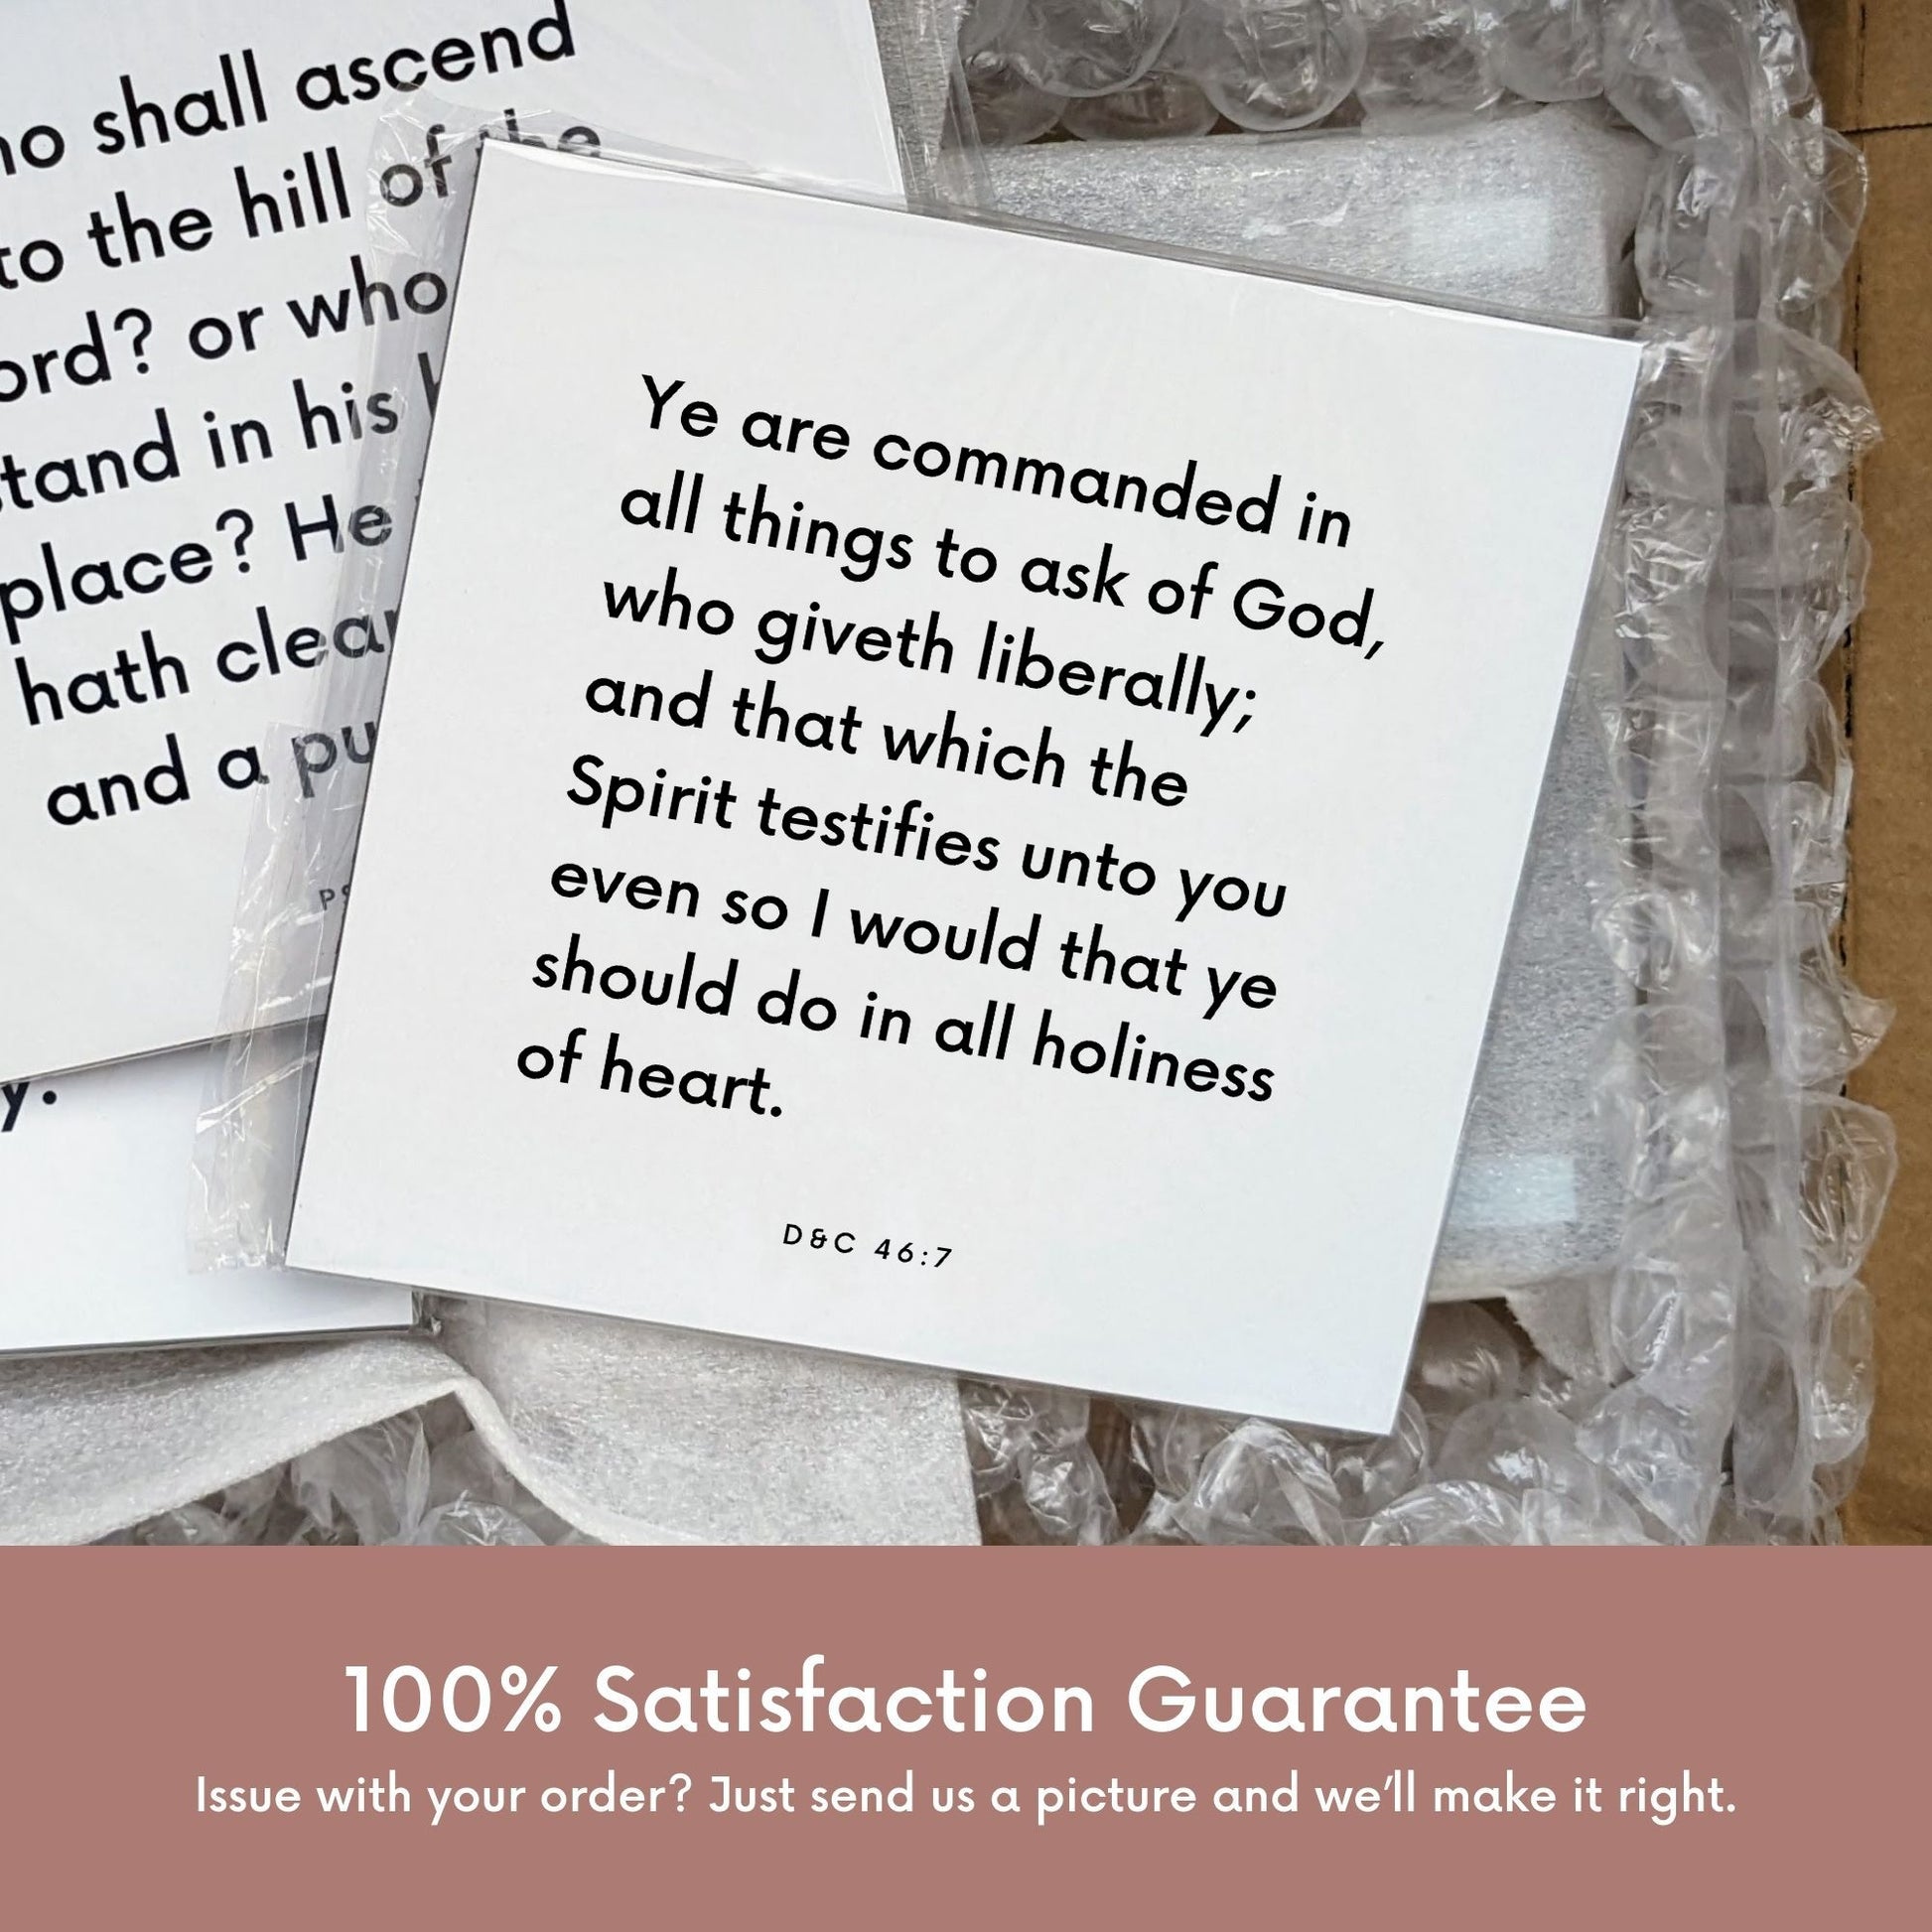 Shipping materials for scripture tile of D&C 46:7 - "Ye are commanded in all things to ask of God"